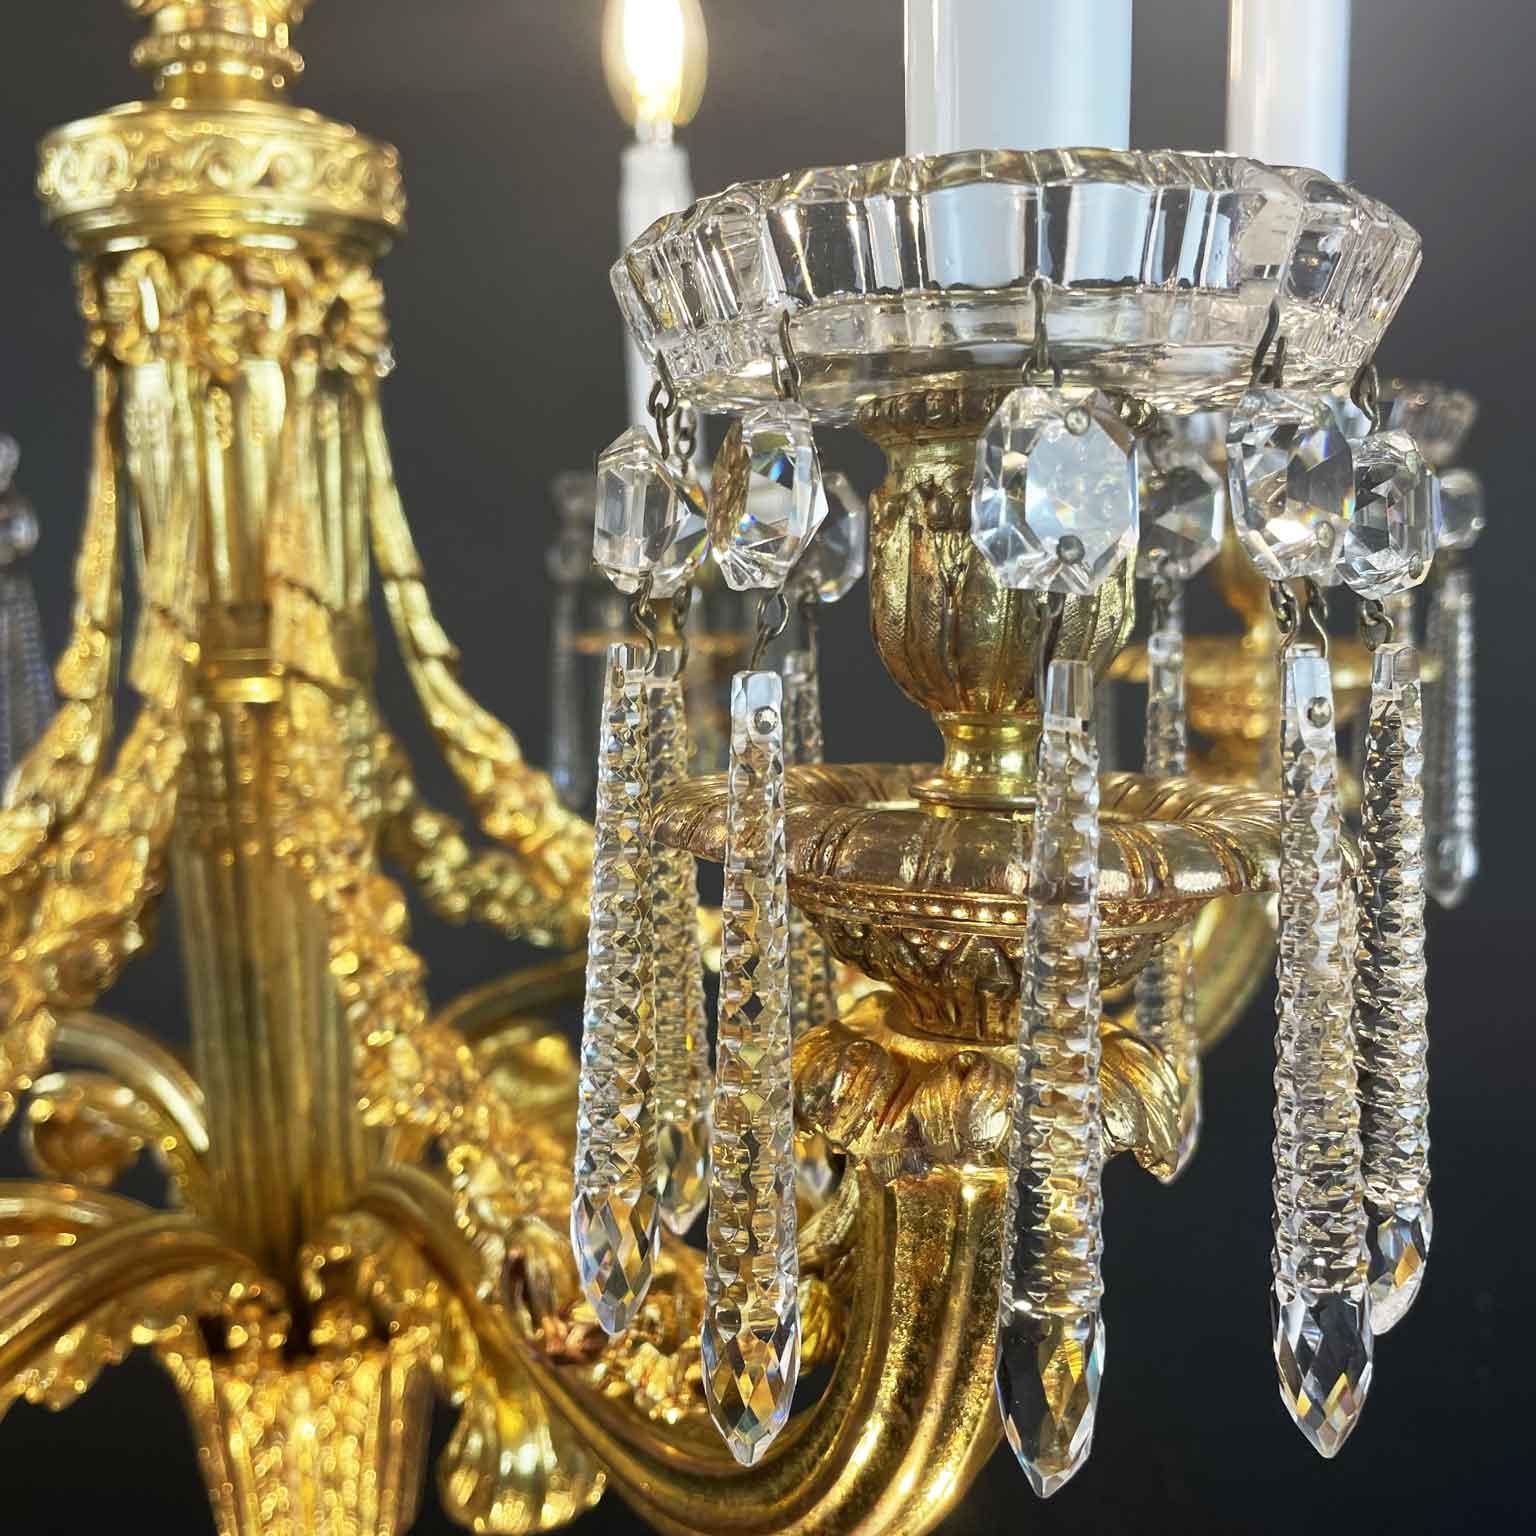 Gilt Baccarat Crystal and Ormolu Chandelier French 20th Century Empire Style Pendant